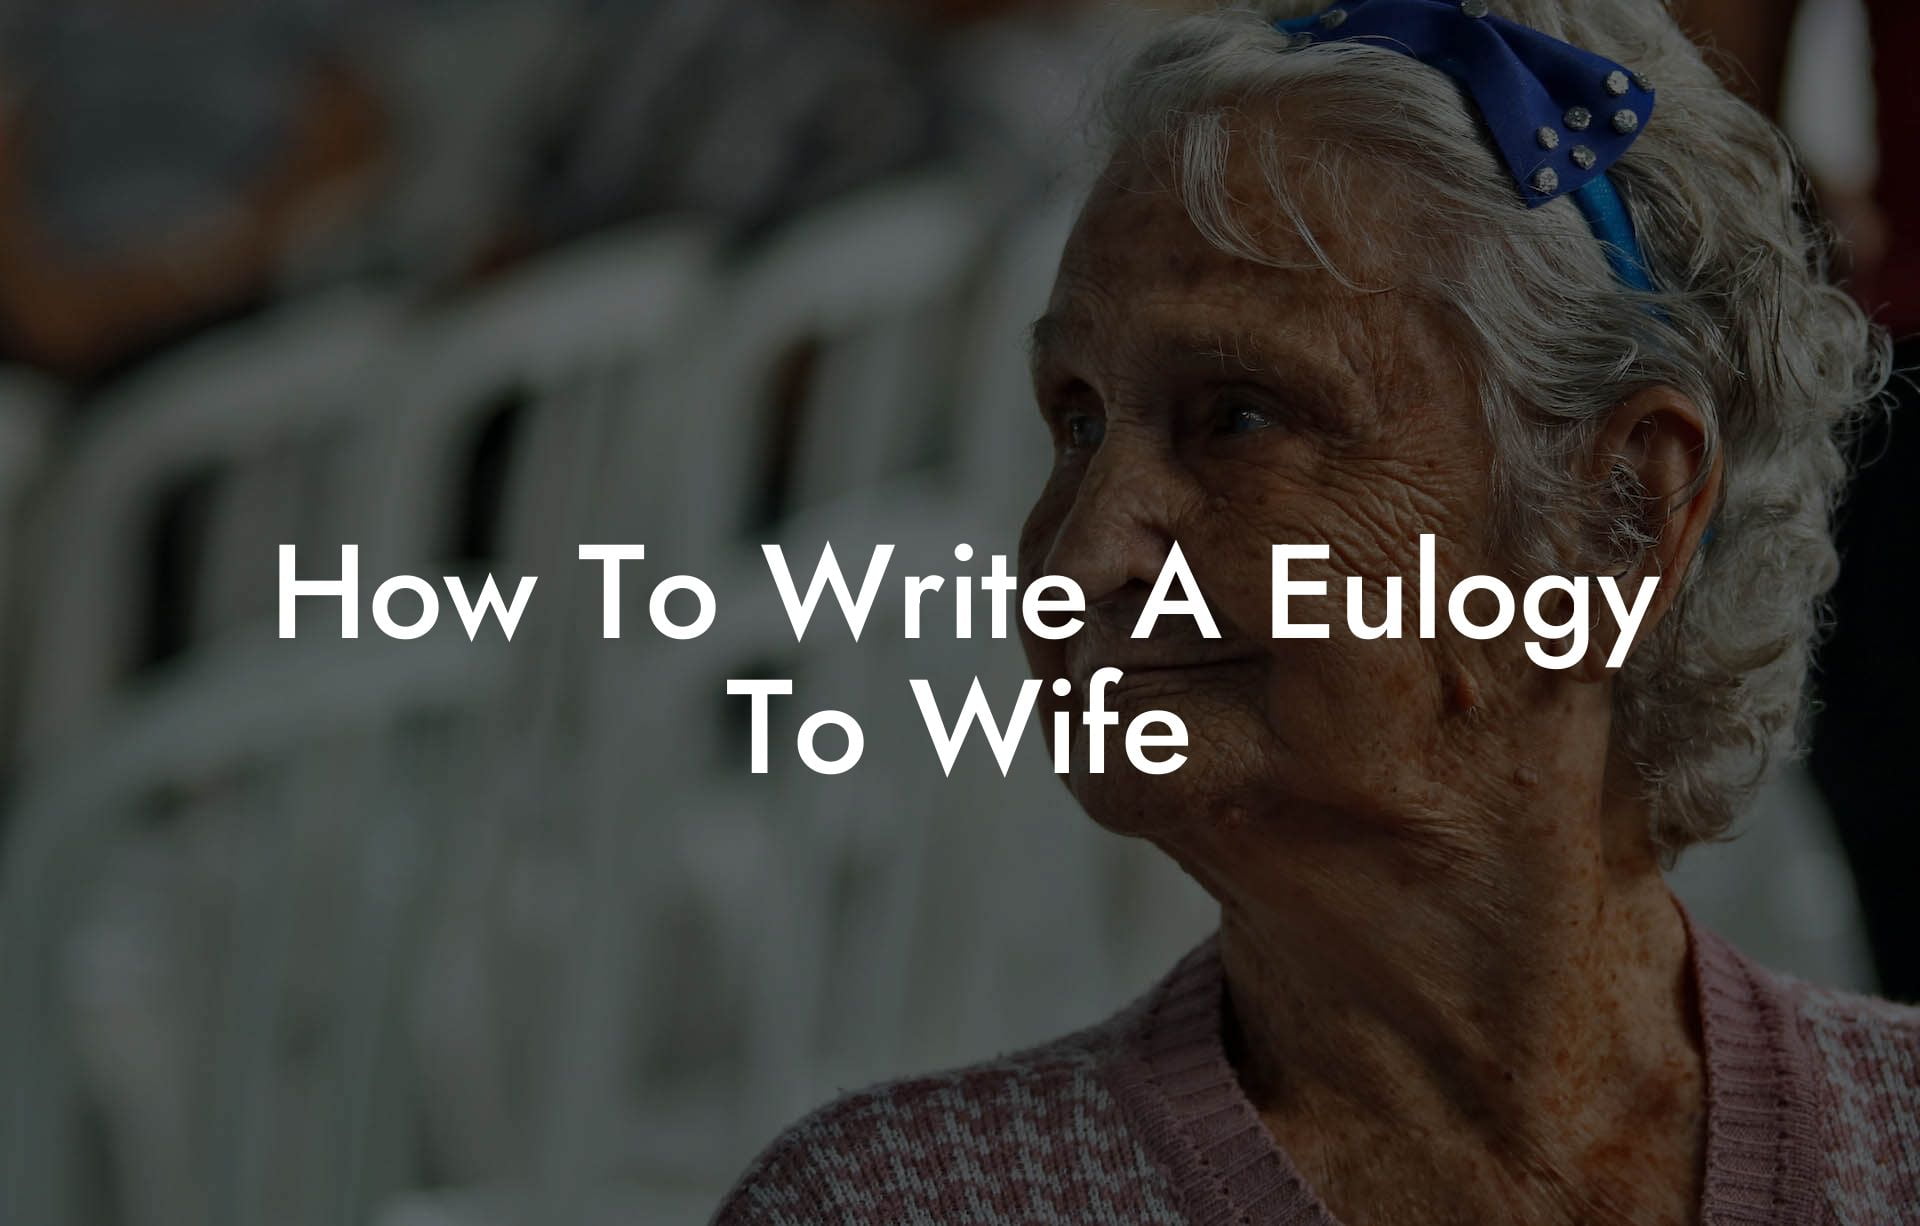 How To Write A Eulogy To Wife